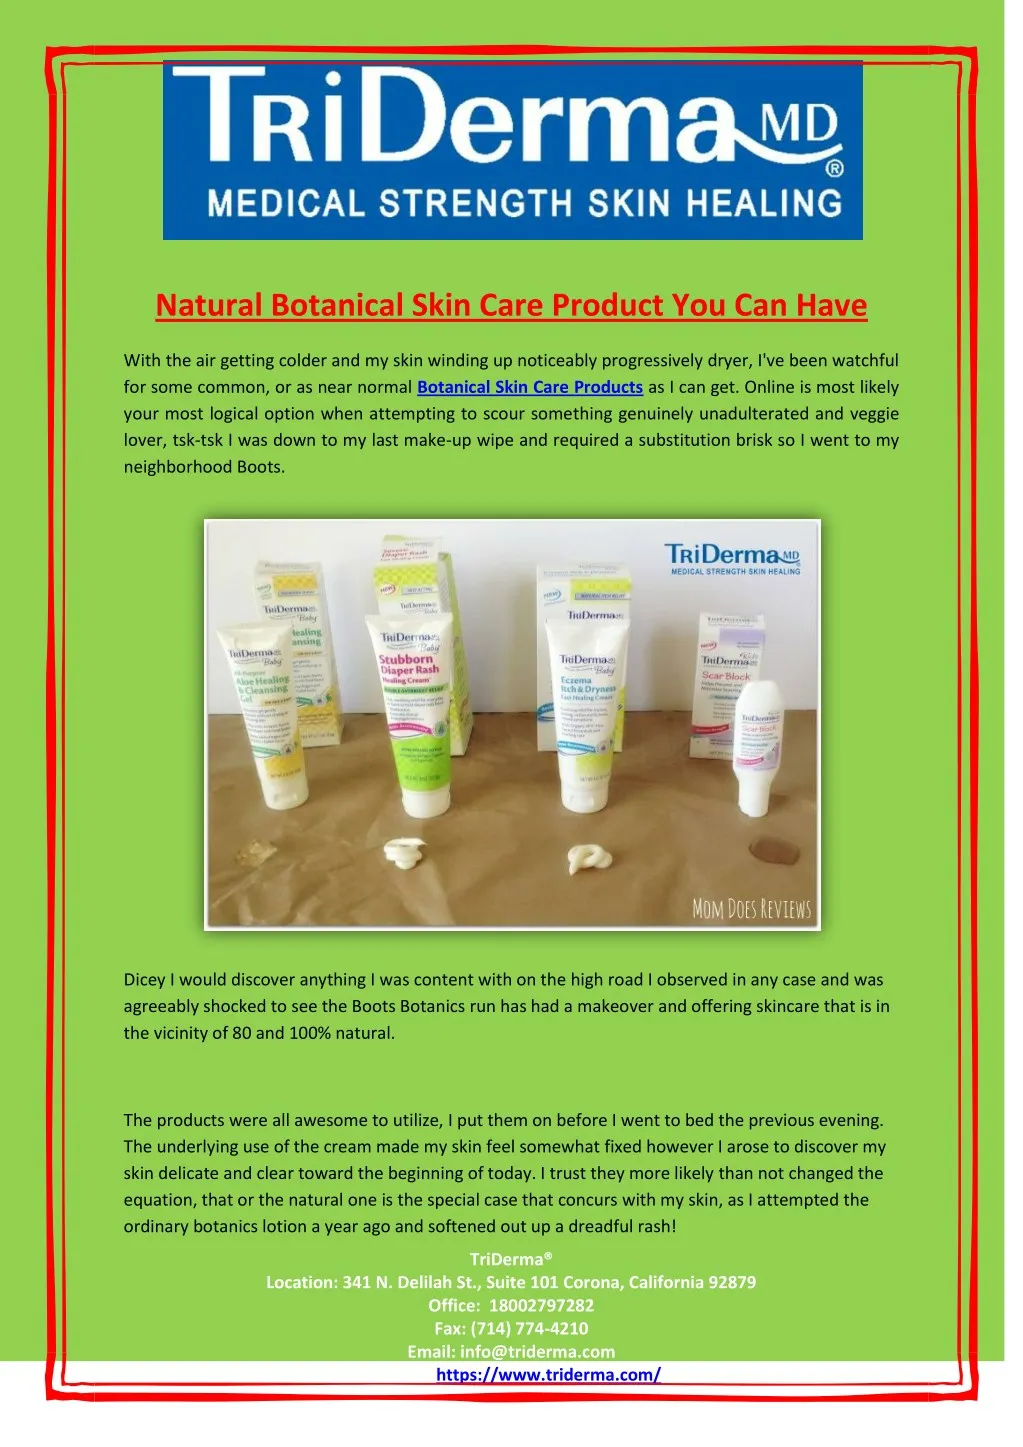 natural botanical skin care product you can have